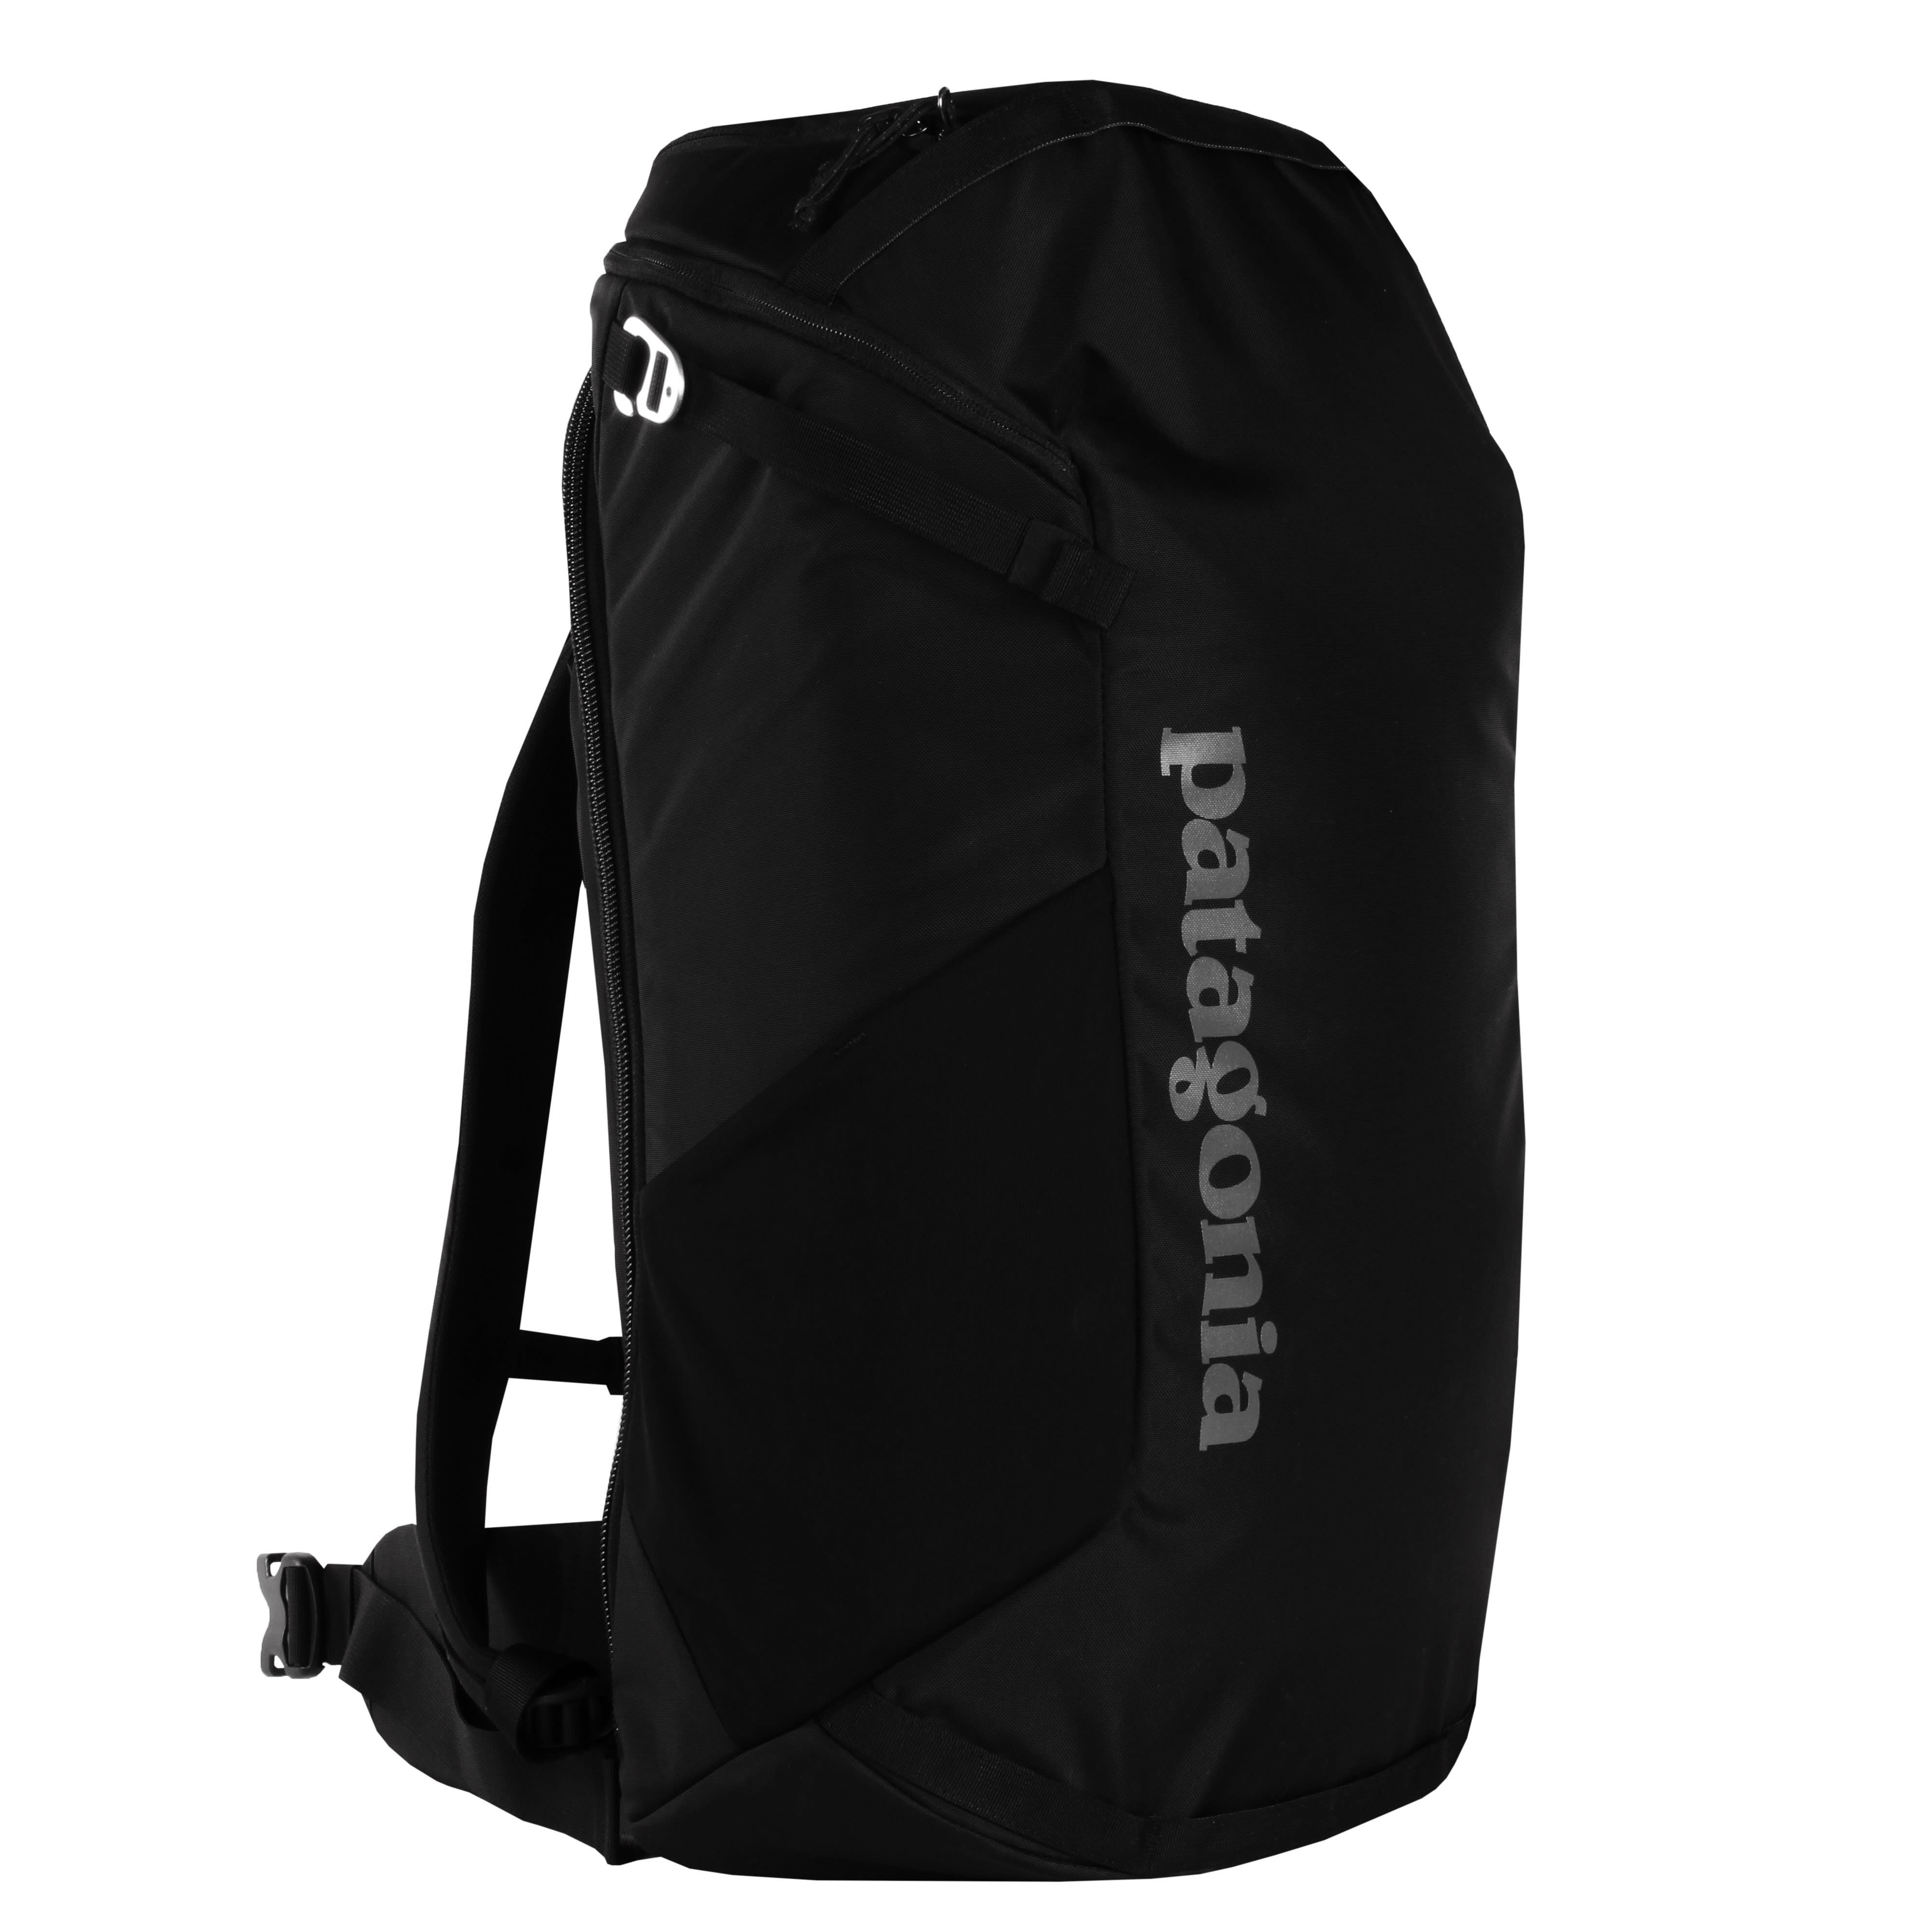 Cragsmith Pack 32L – Patagonia Worn Wear